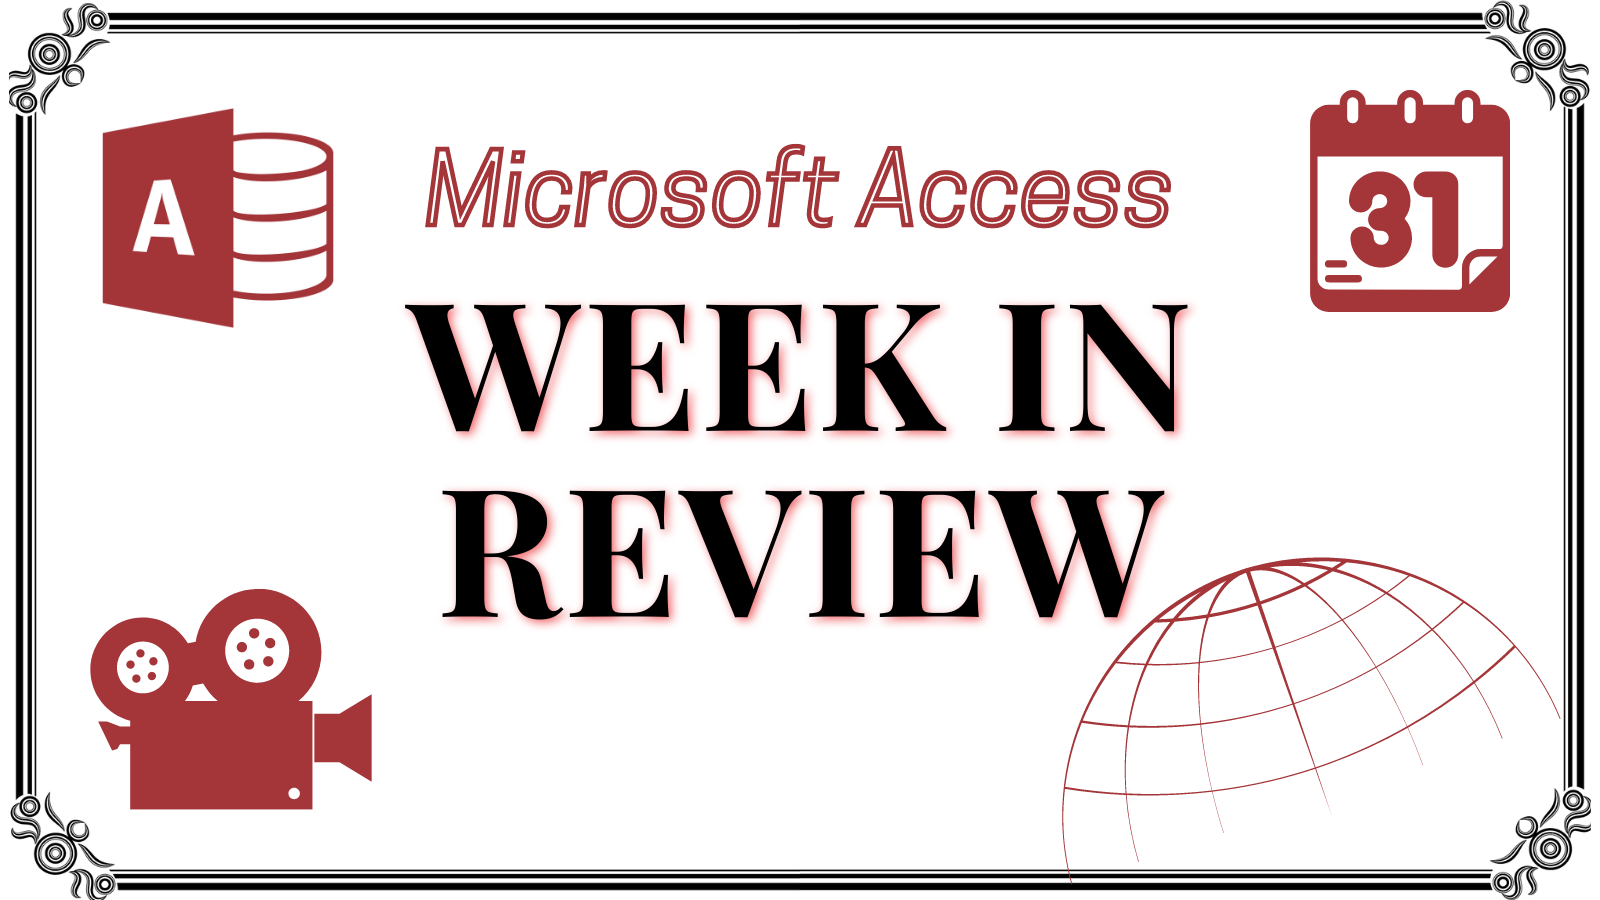 Week in Review: February 18, 2023